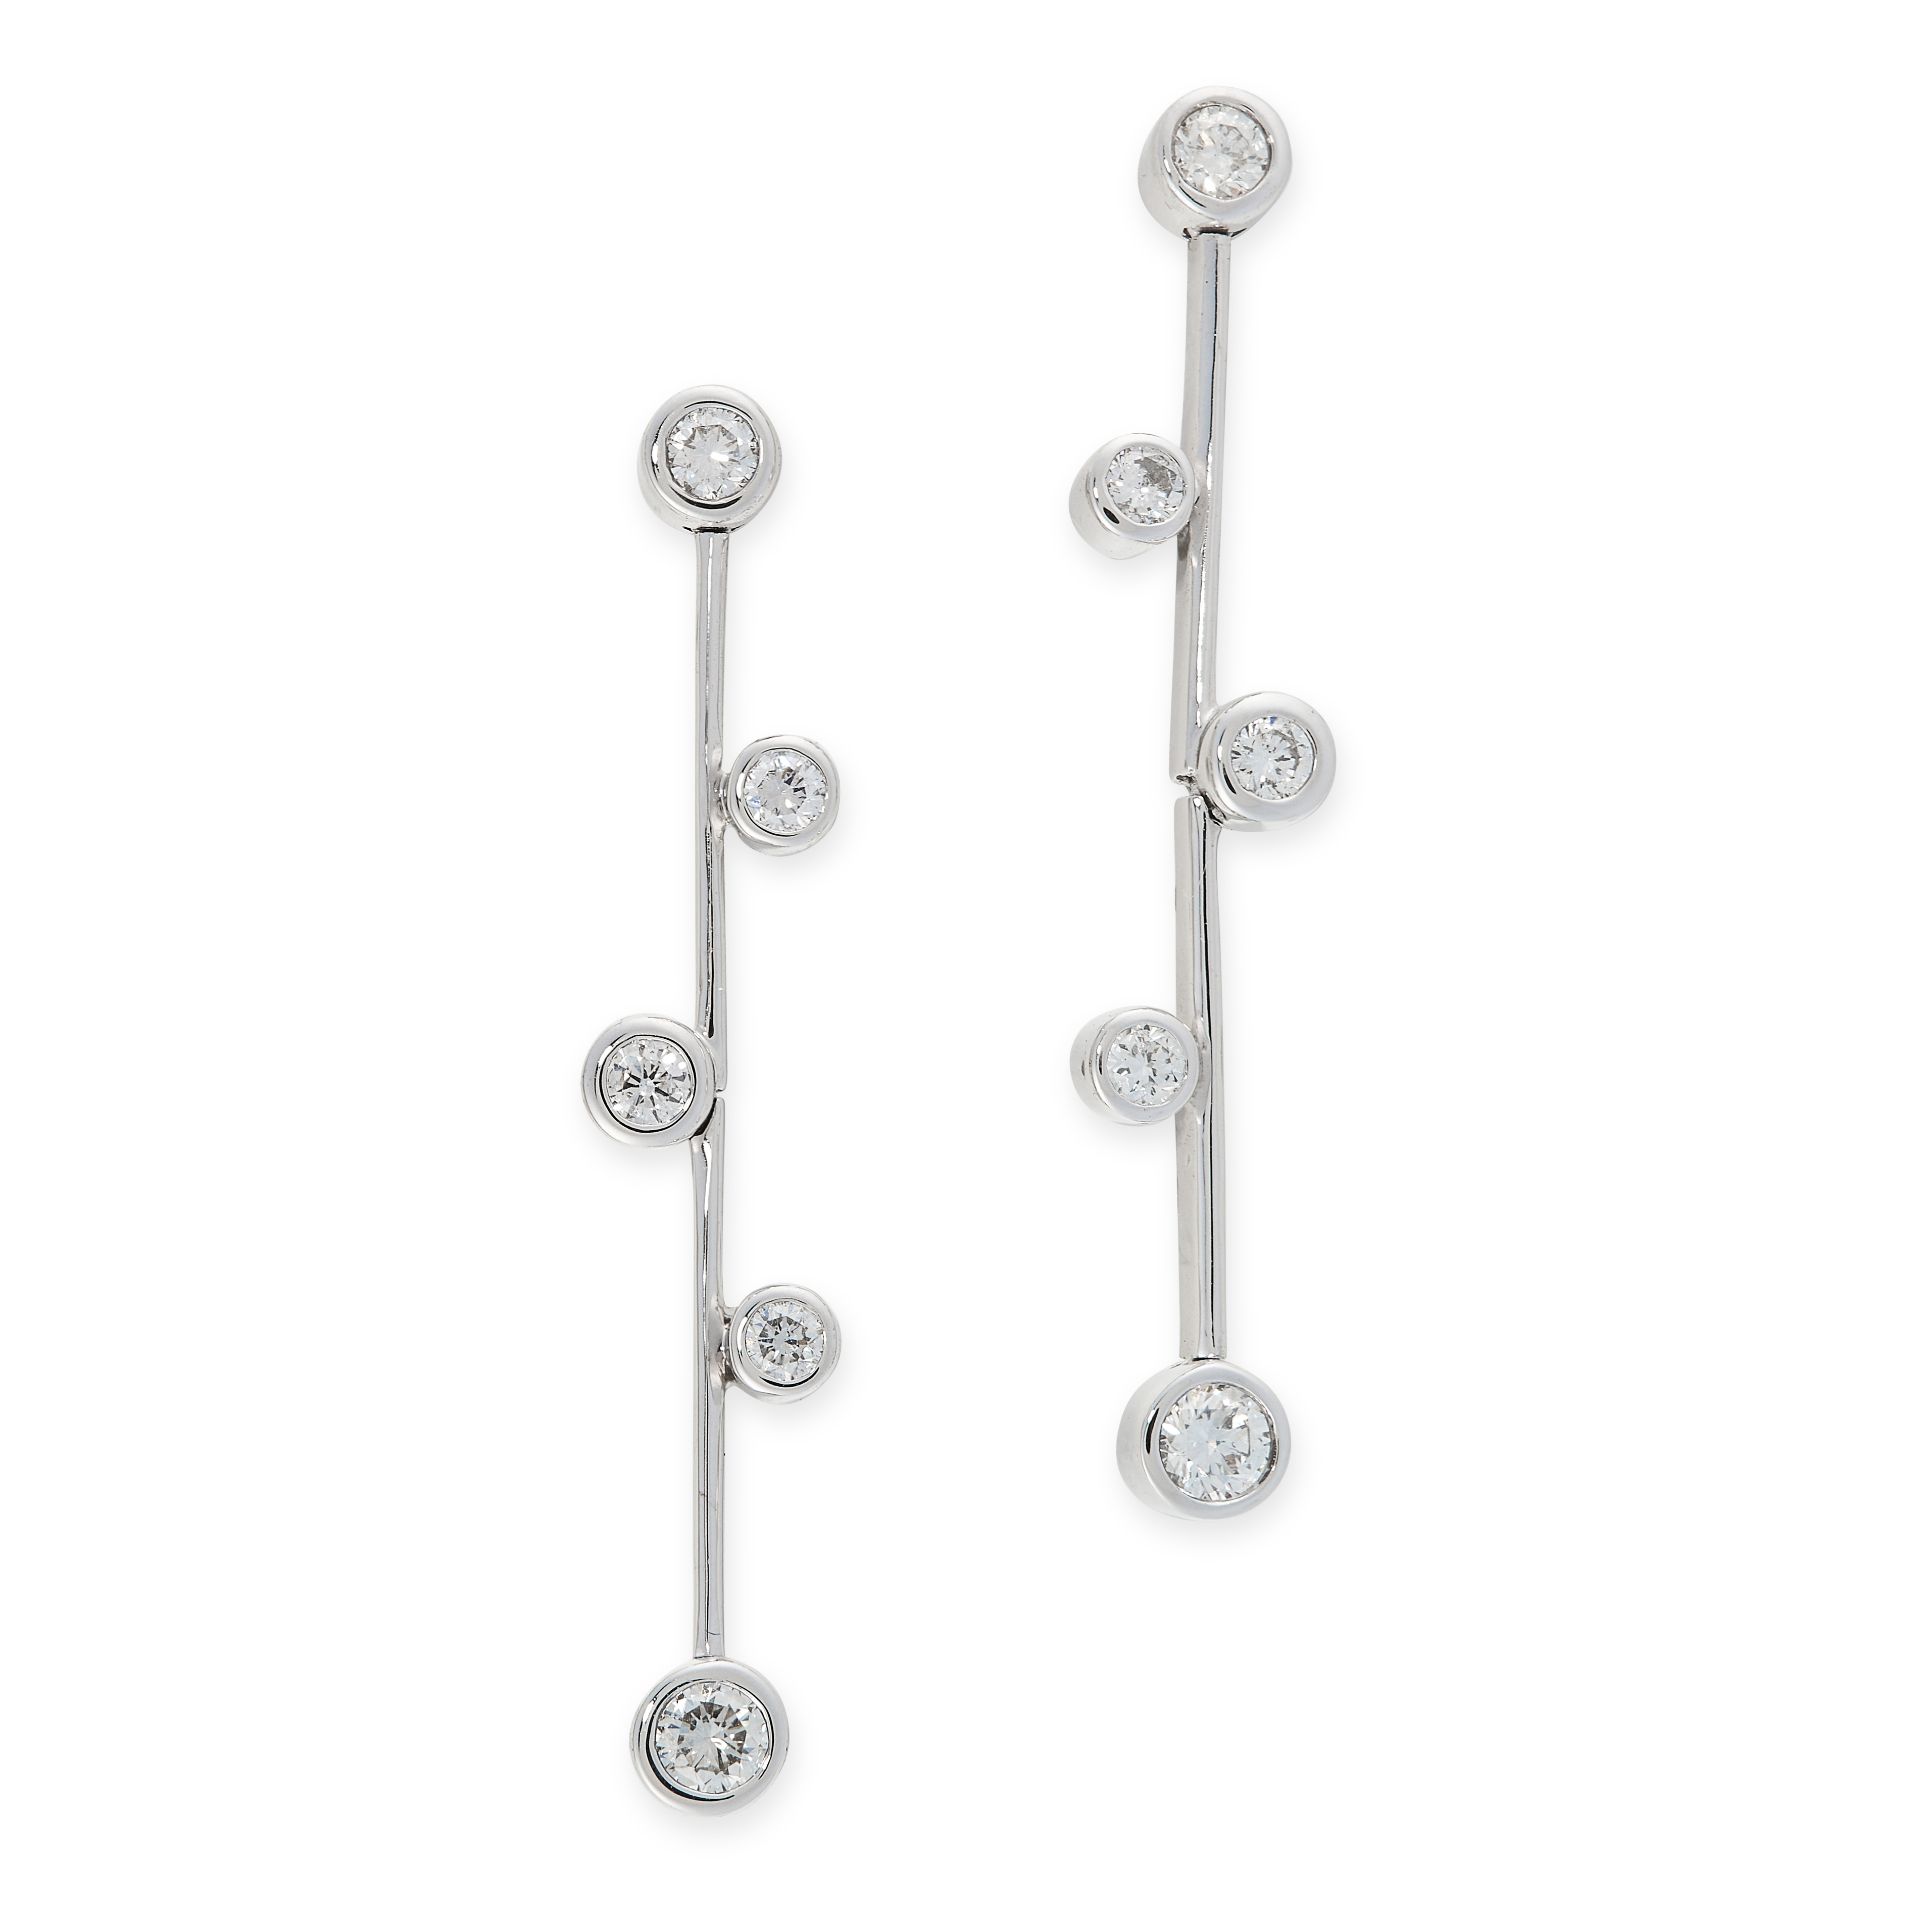 A PAIR OF DIAMOND DROP EARRINGS in 18ct white gold, each designed as an articulated baton set with